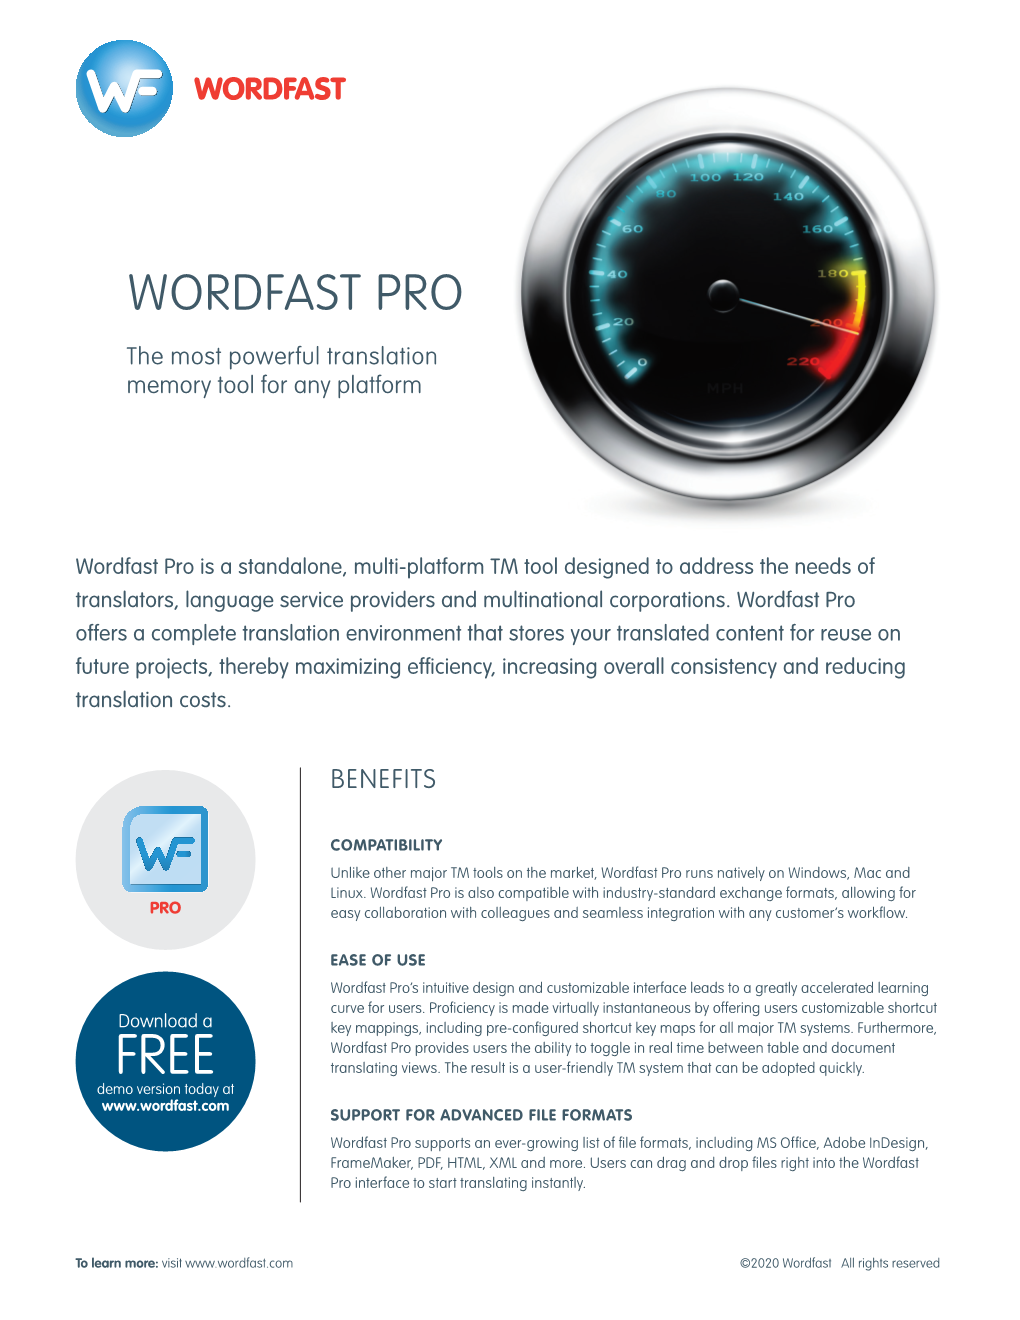 WORDFAST PRO the Most Powerful Translation Memory Tool for Any Platform